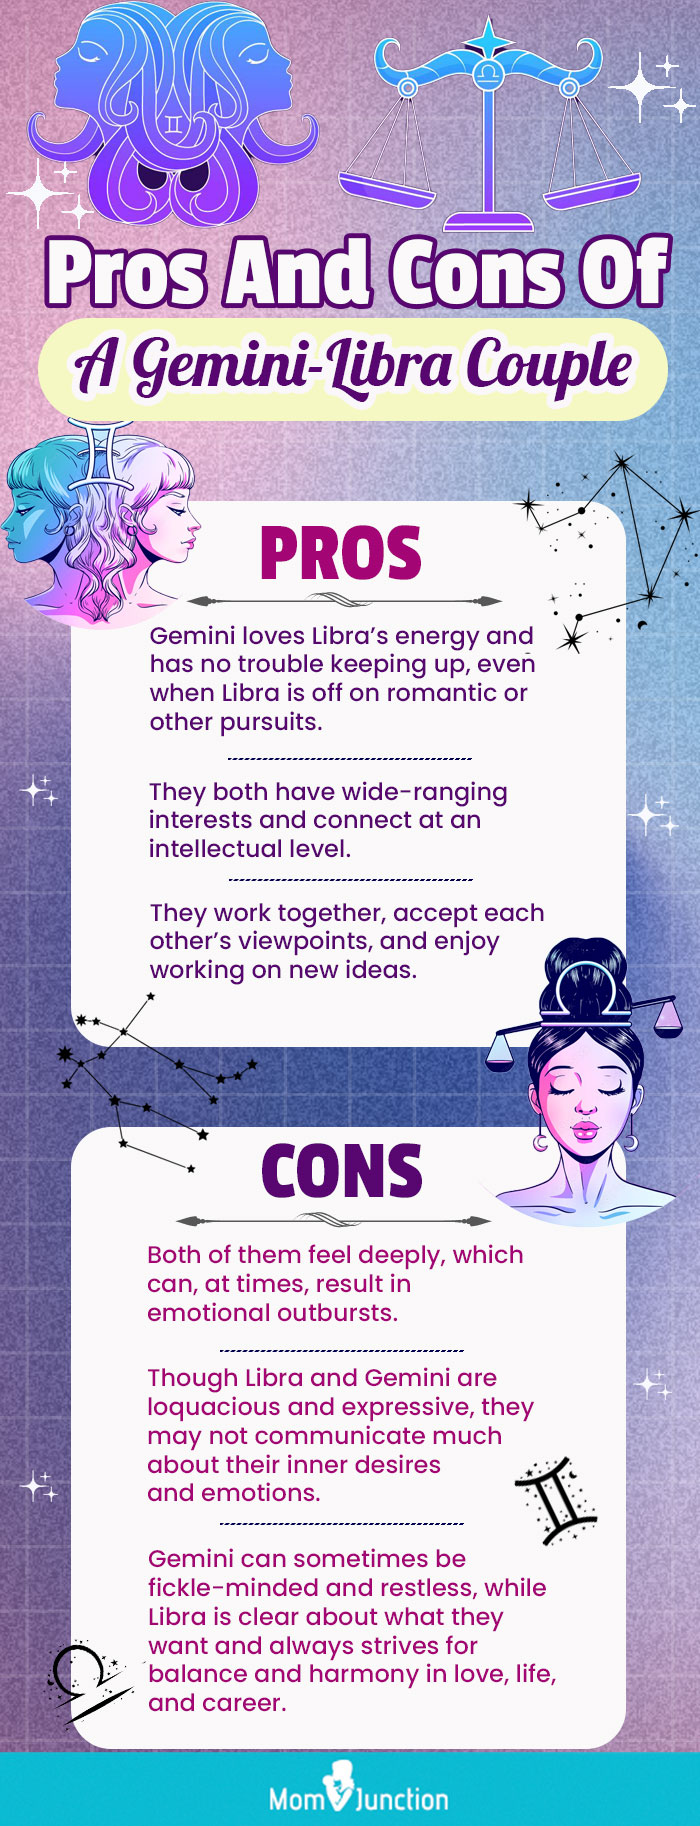 pros and cons of gemini libra [infographic]